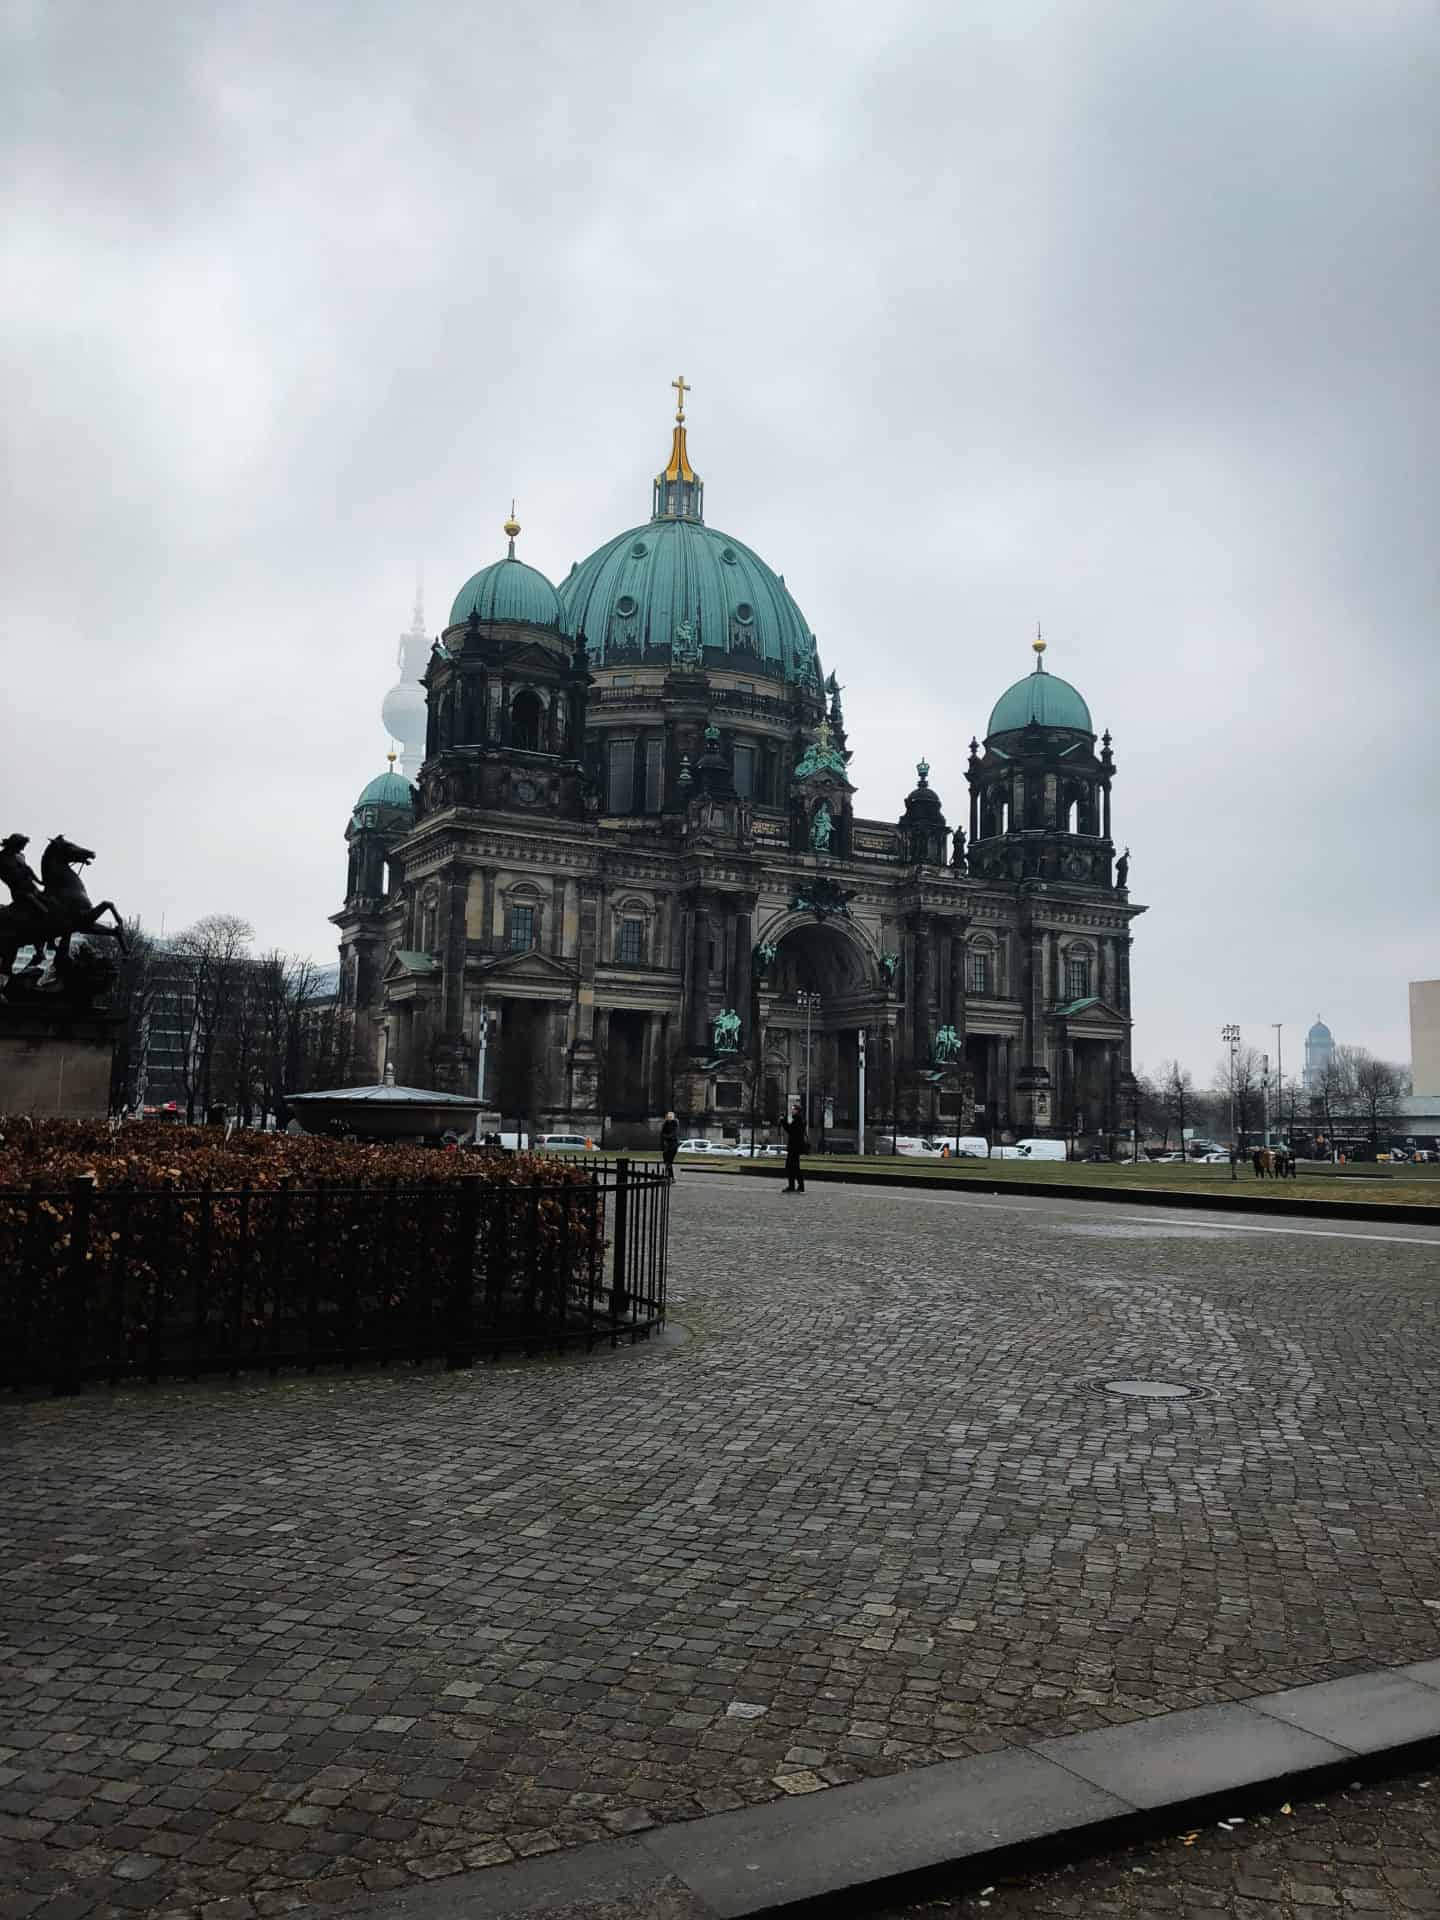 The Berlin Cathedral on a dark moody day